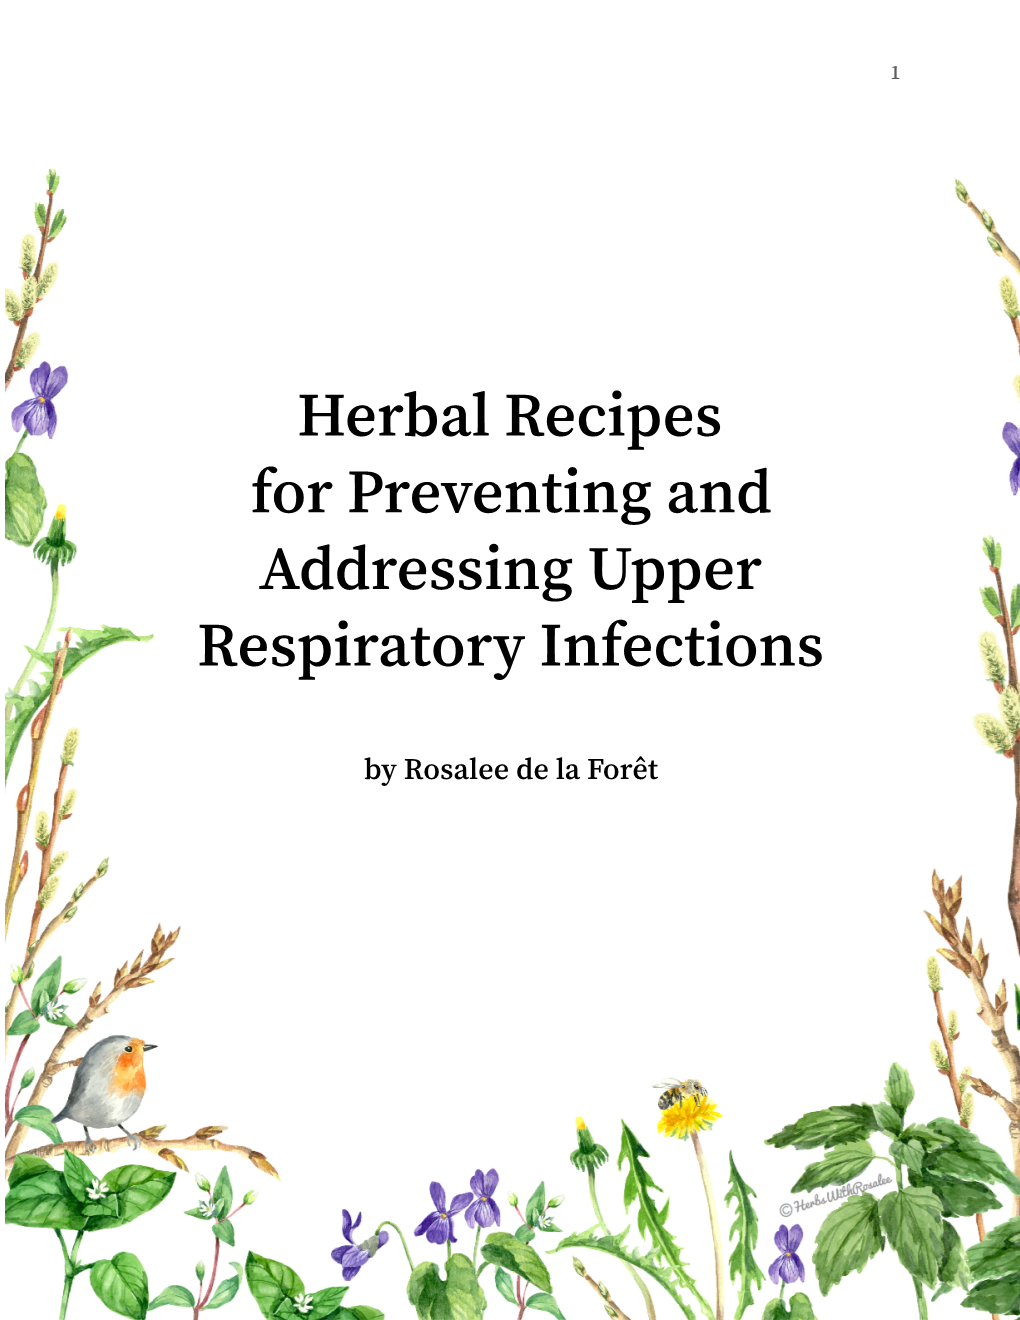 Herbal Recipes for Preventing and Addressing Upper Respiratory